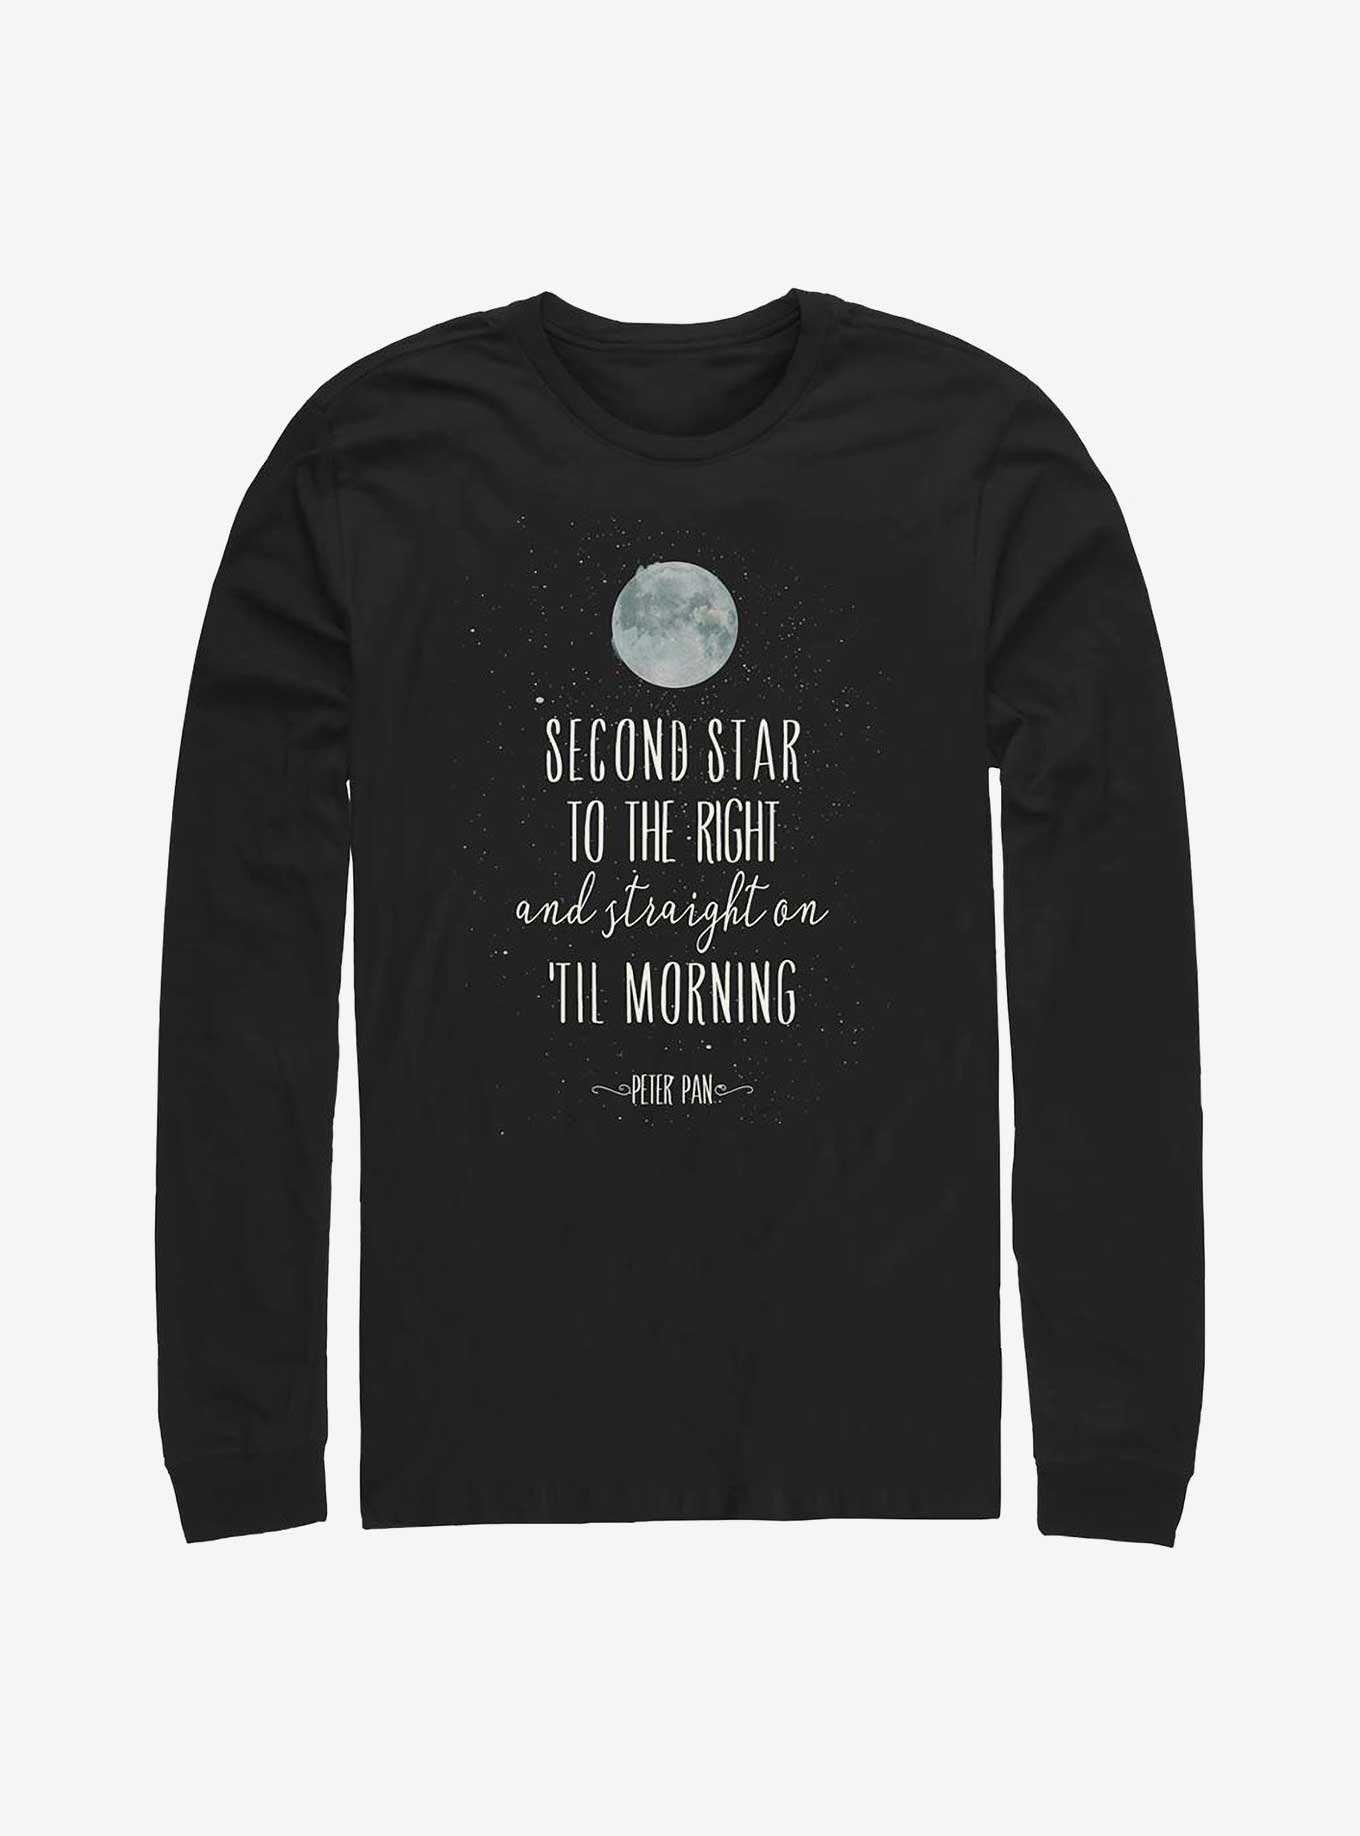 Disney Peter Pan Second Star To The Right Script Long-Sleeve T-Shirt, , hi-res